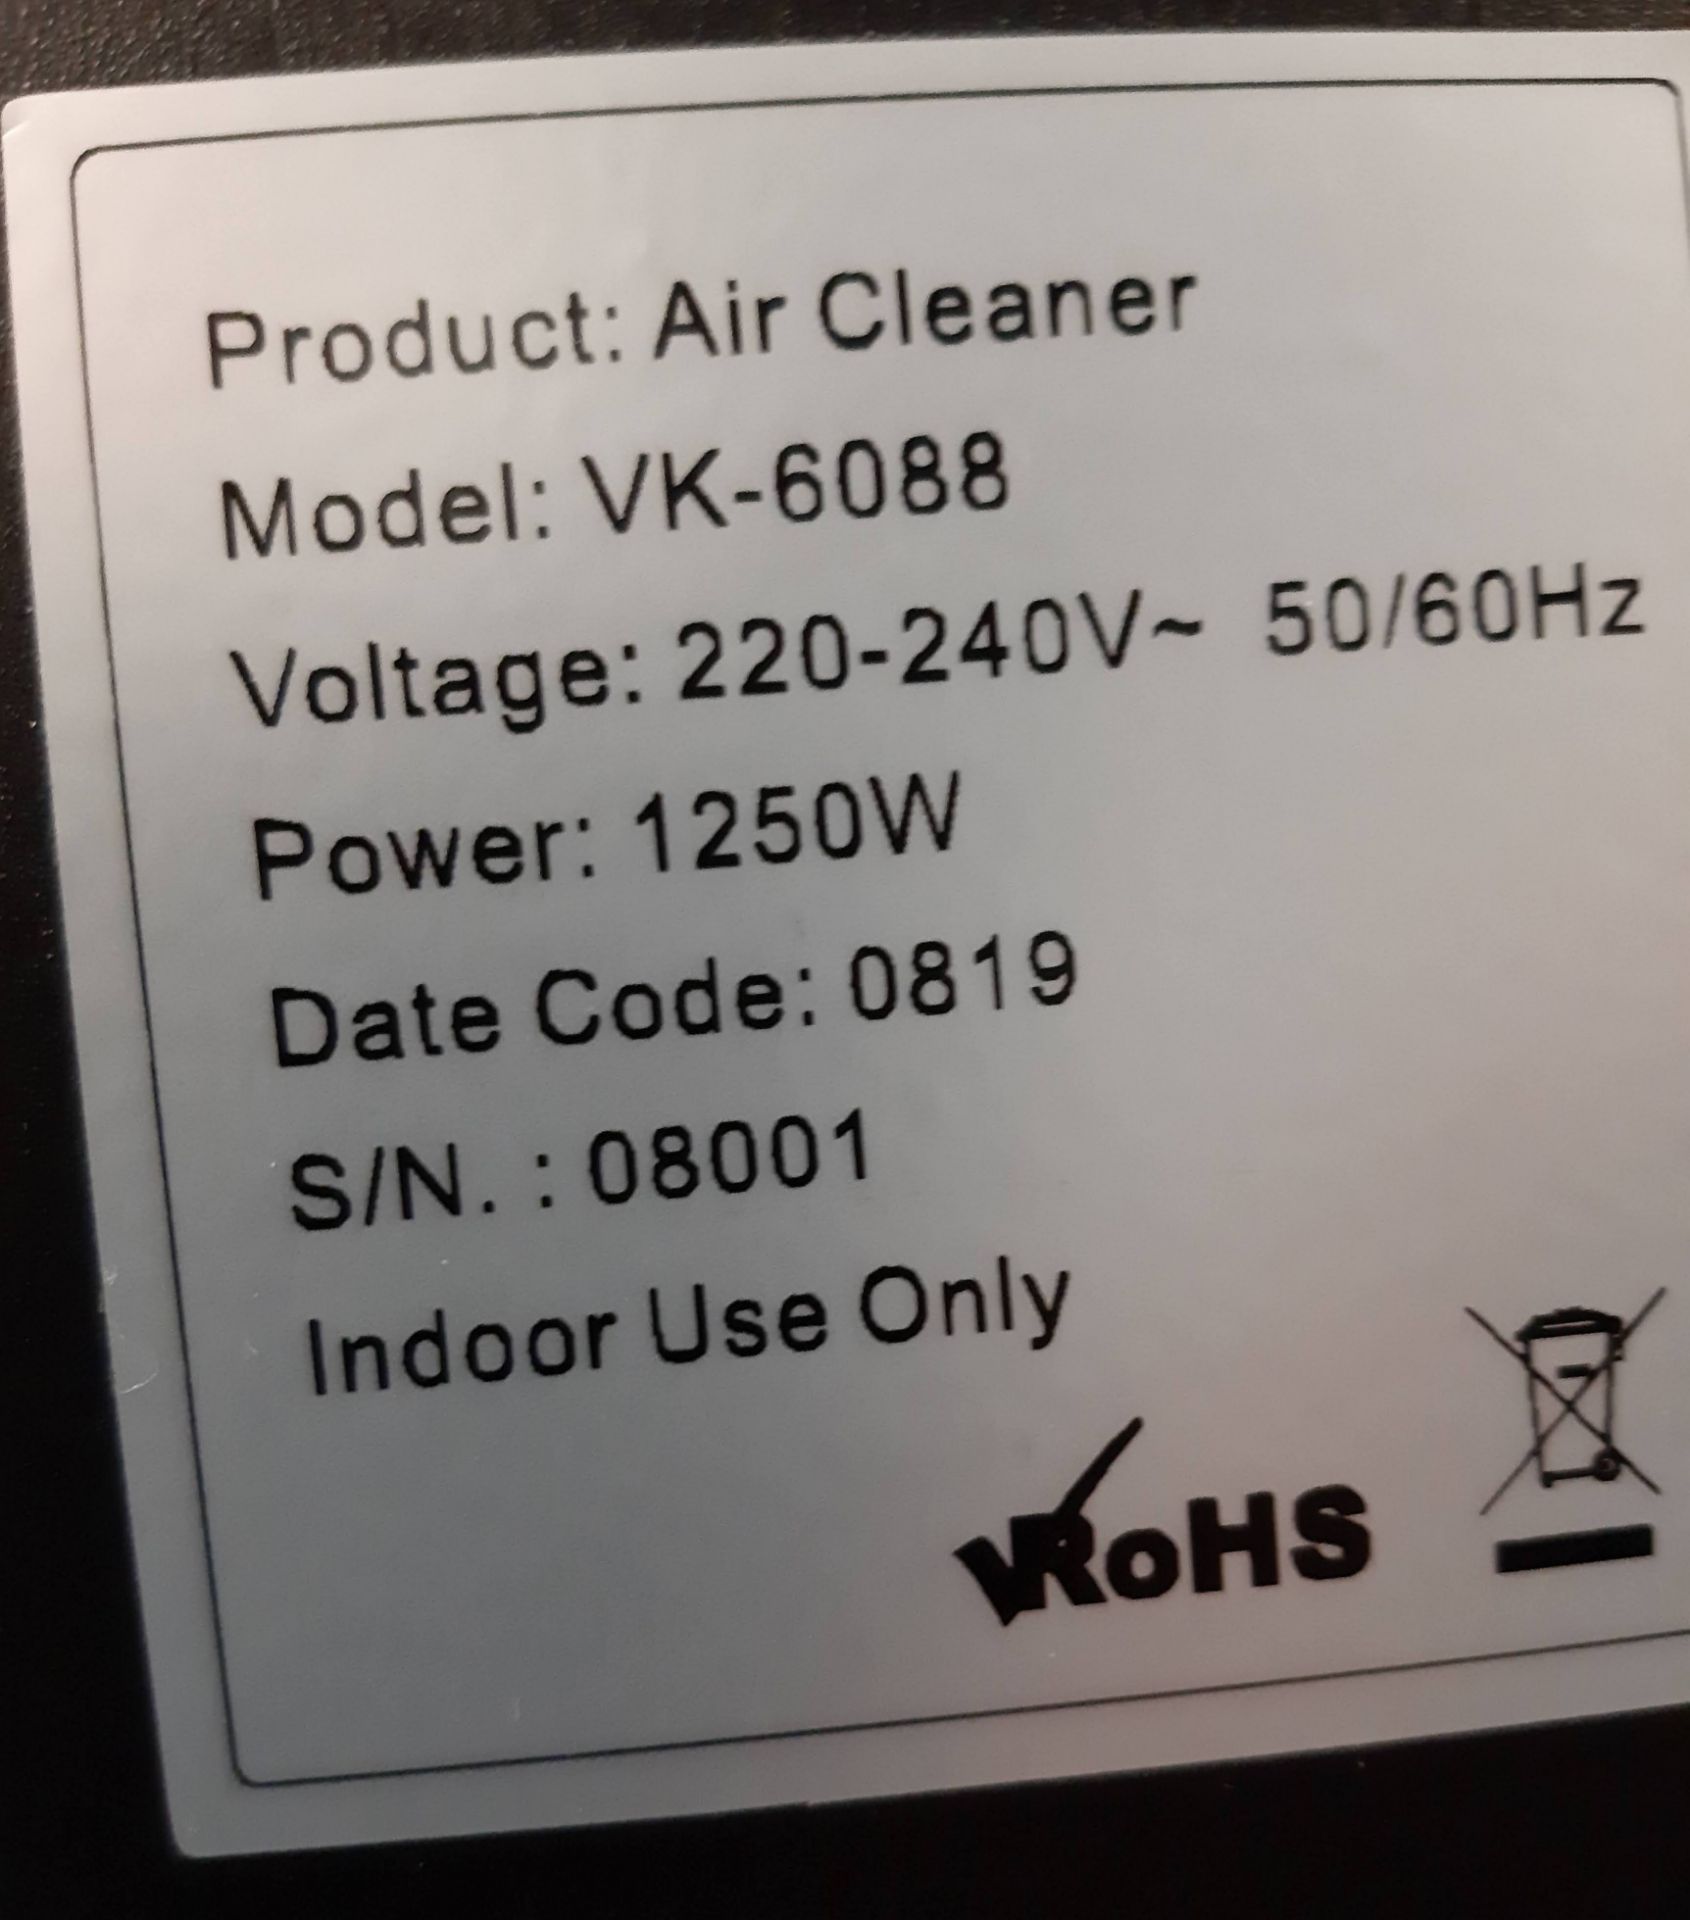 VROHS MOD. VK-608S AIR CLEANER. S/N:08001 - Image 4 of 4